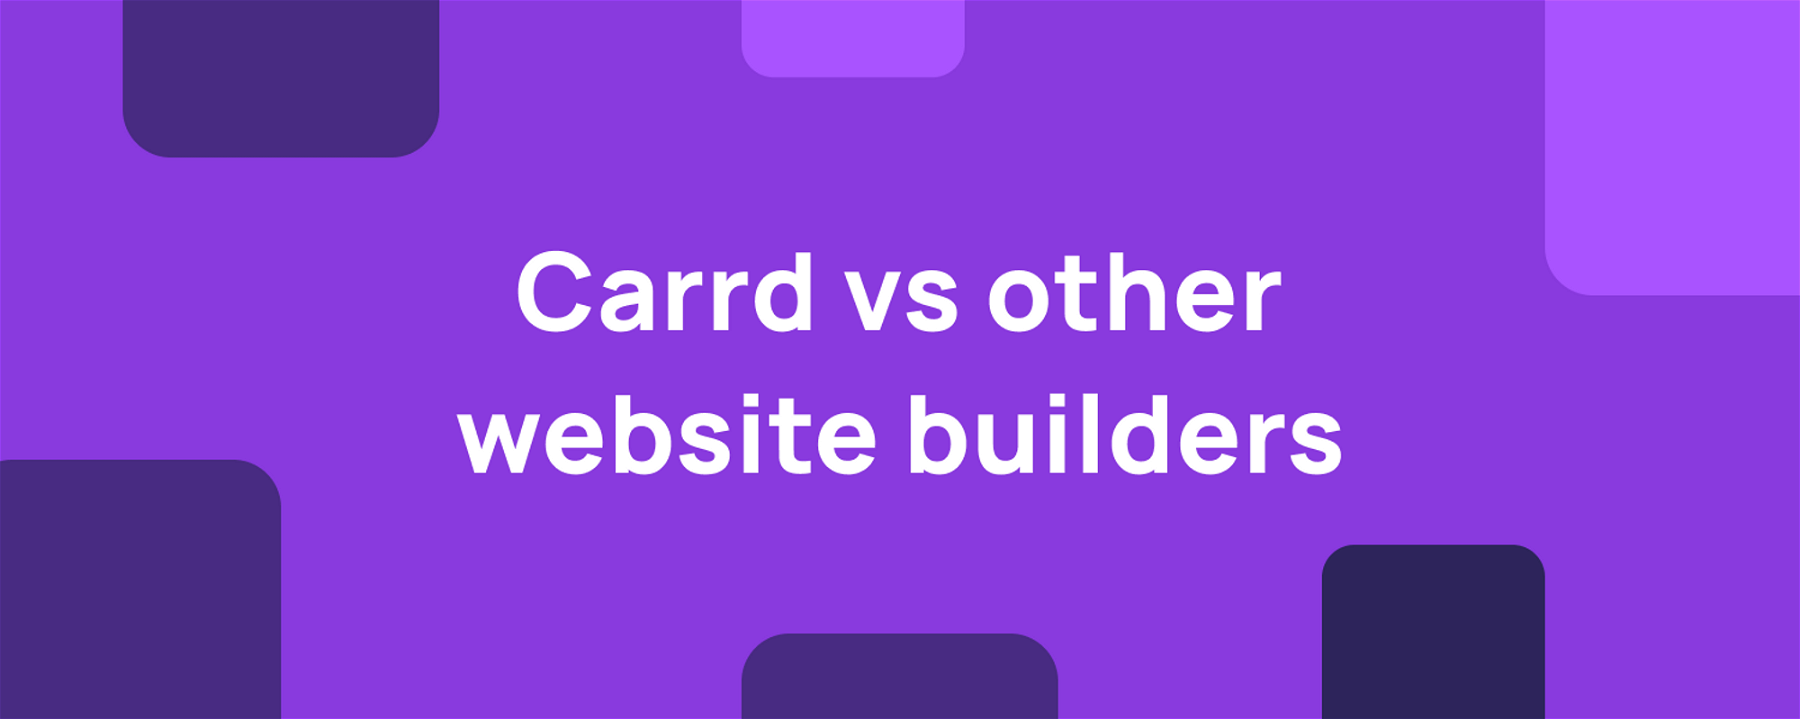 Carrd vs other website builders – which is best?